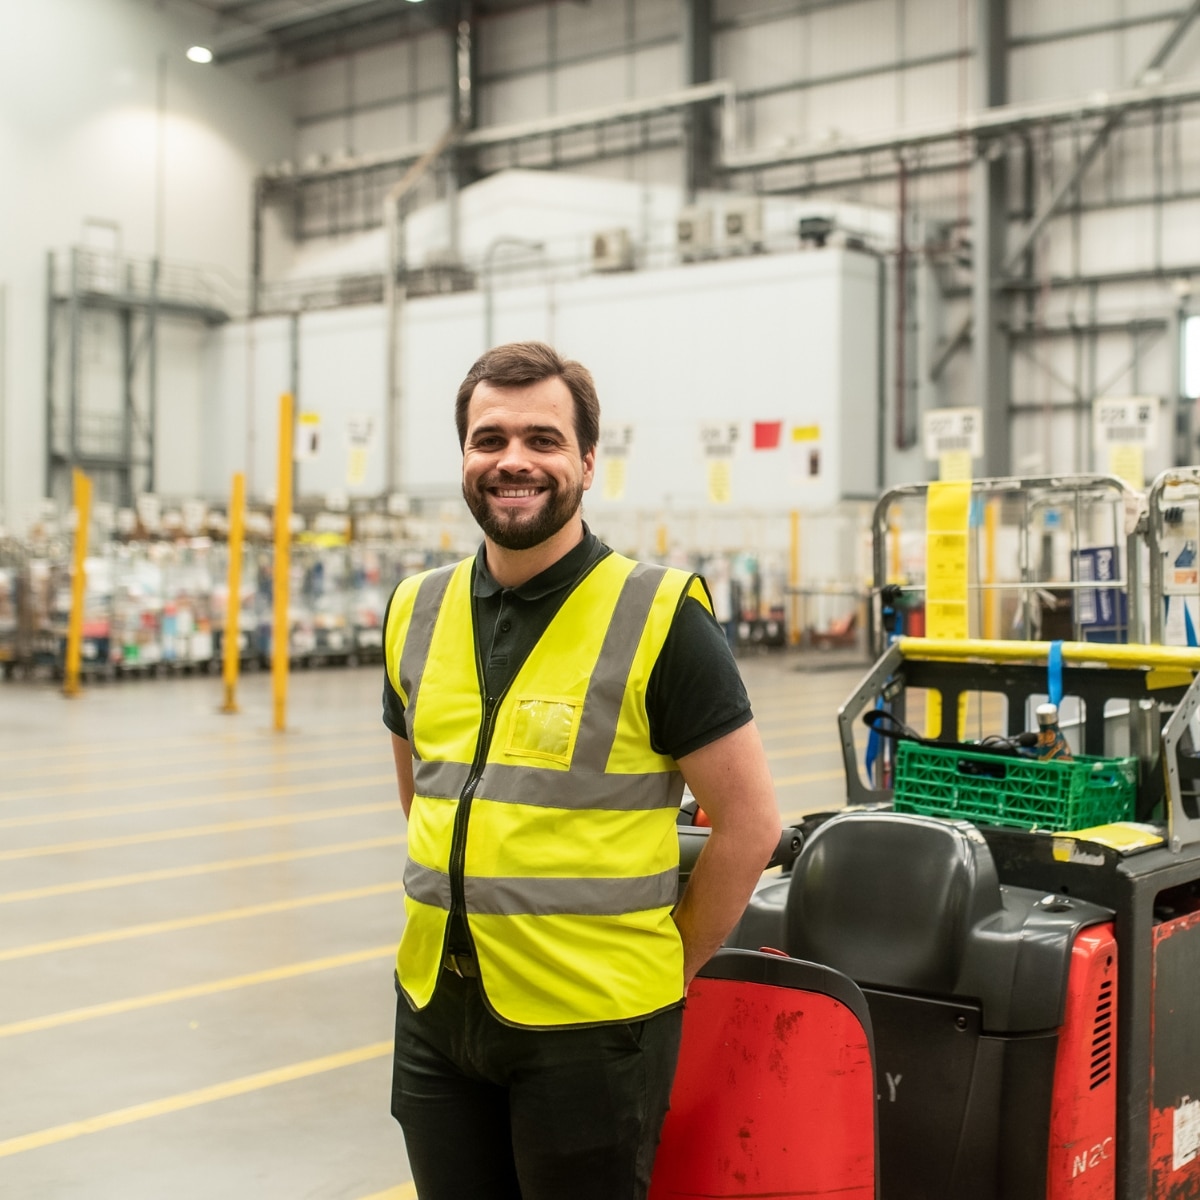 A photo of a man in a high-vis jacket in a warehouse.